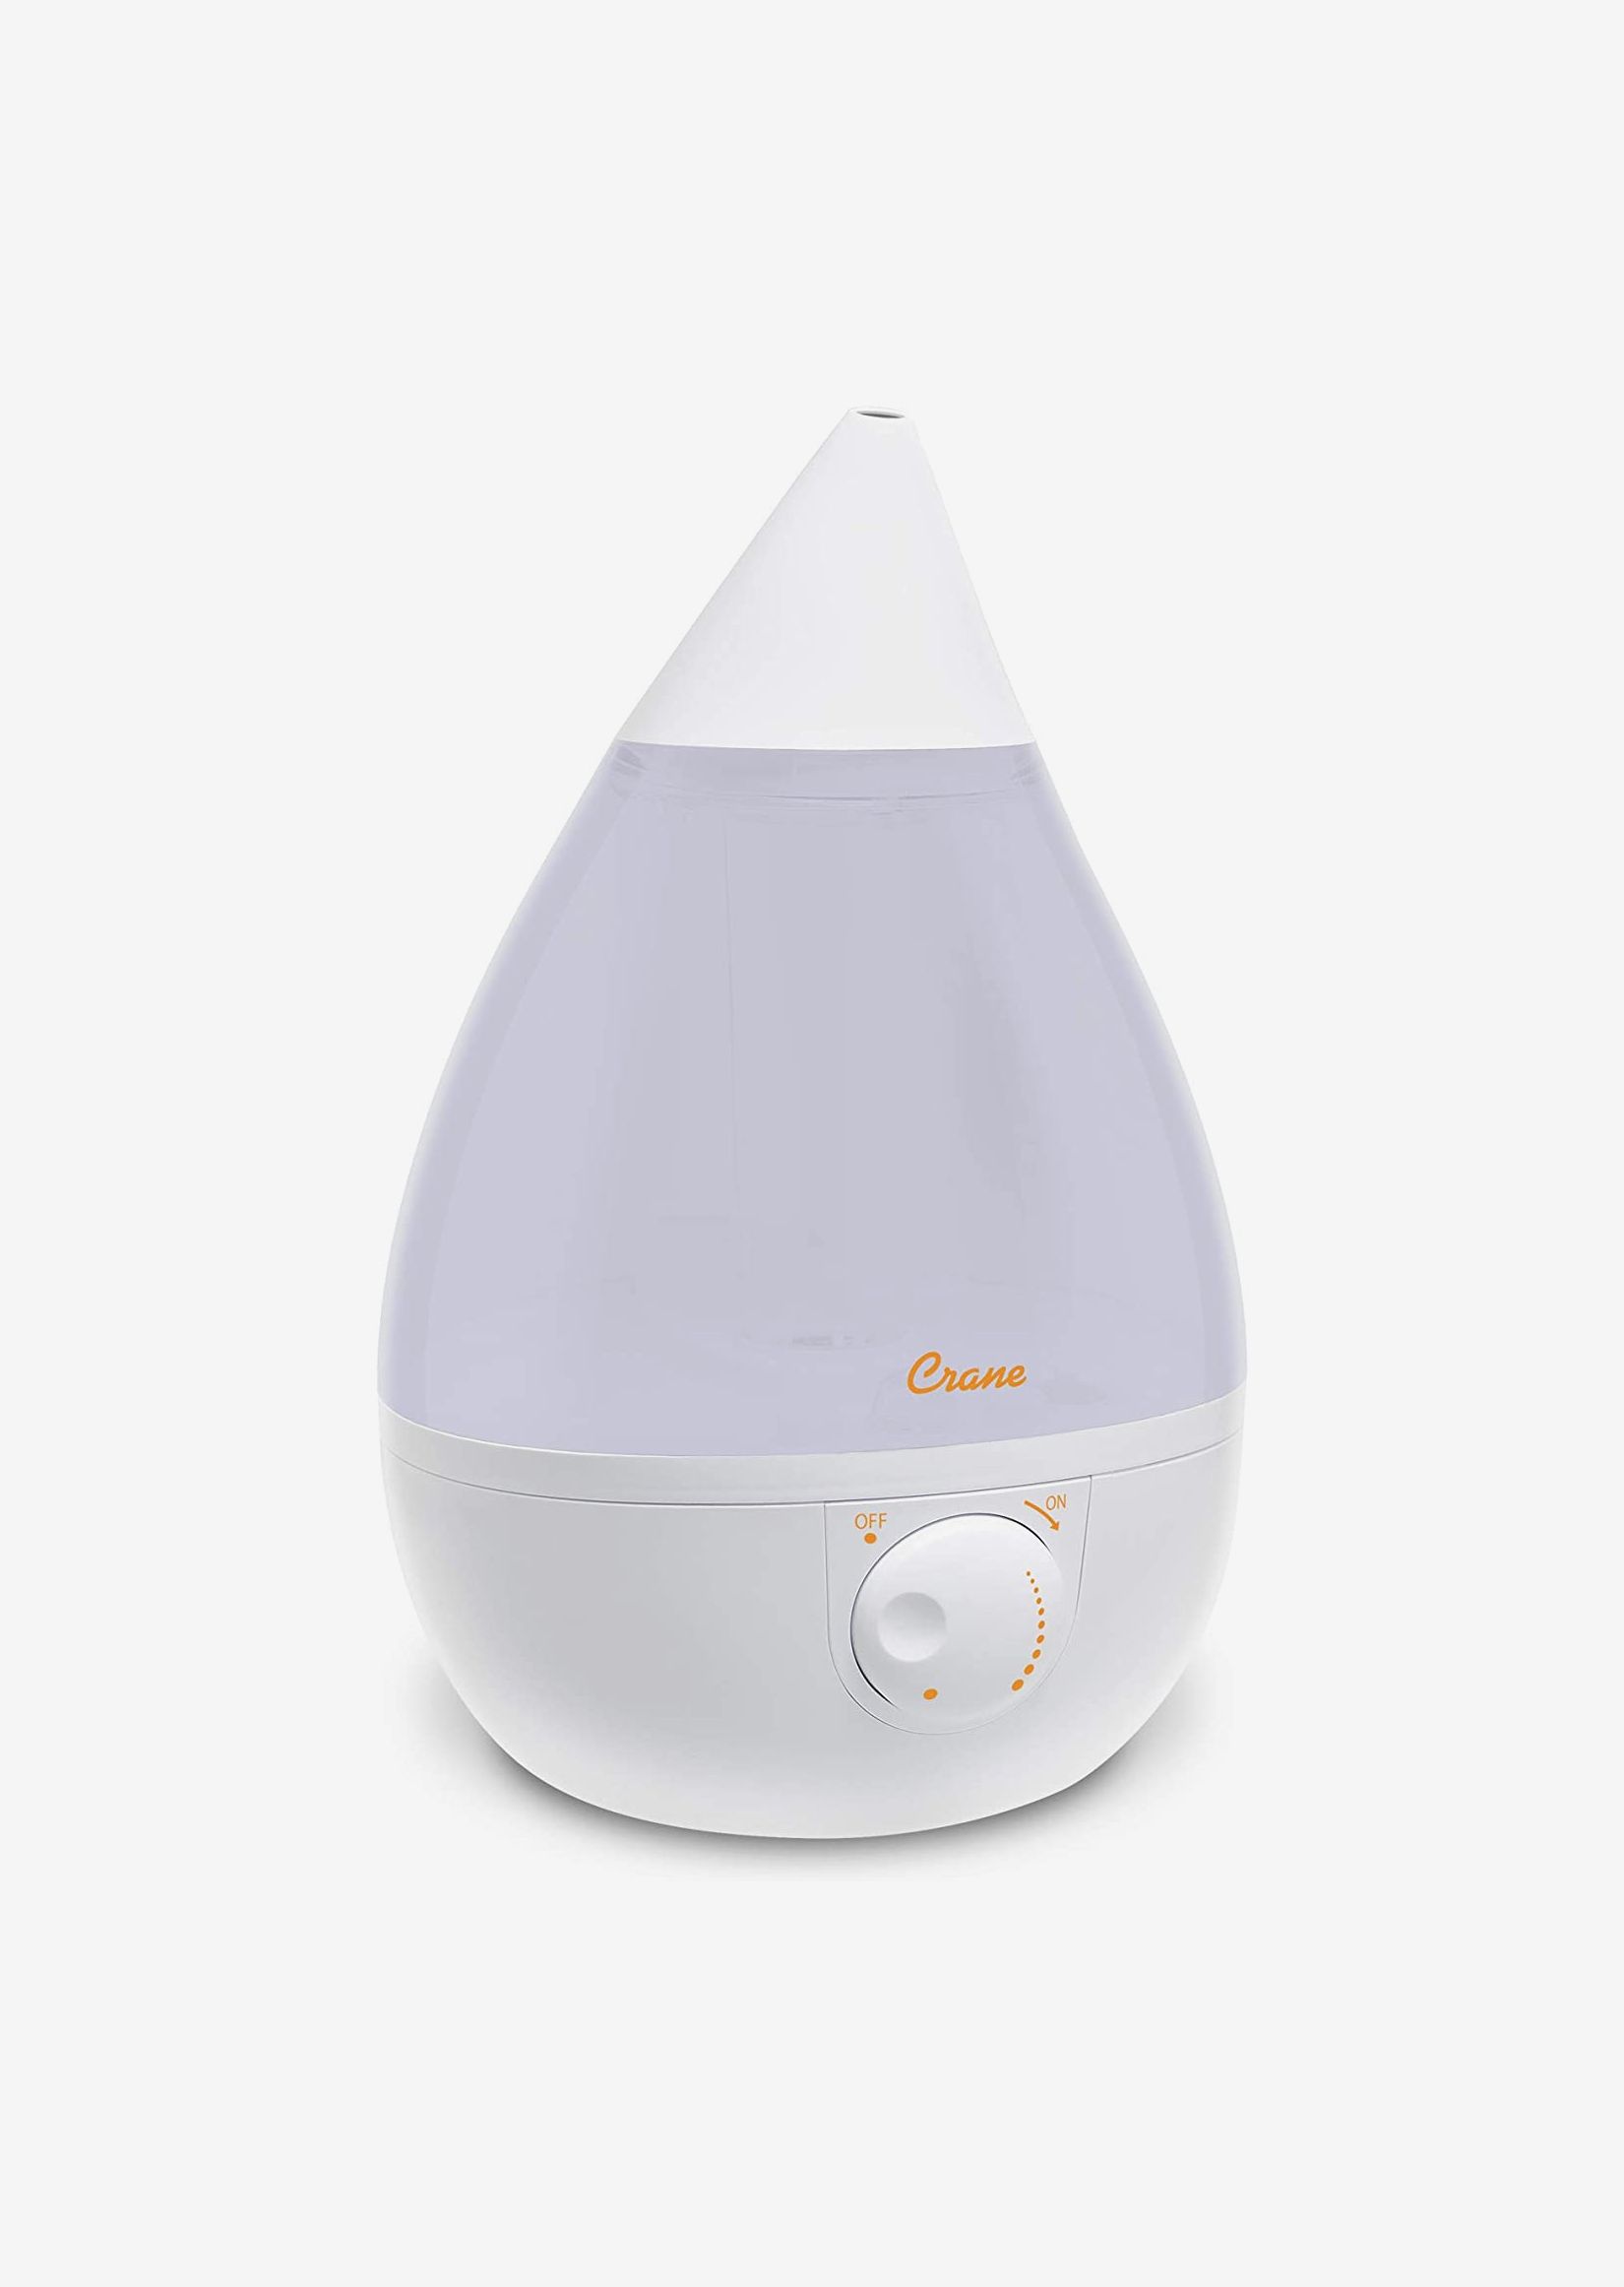 W h i t e Humidifier H2O Quiet Easy to Clean Portable Small Mini 3 in 1 Cool Mist Ultrasonic USB Rechargeable Cute with Light Yoga UK